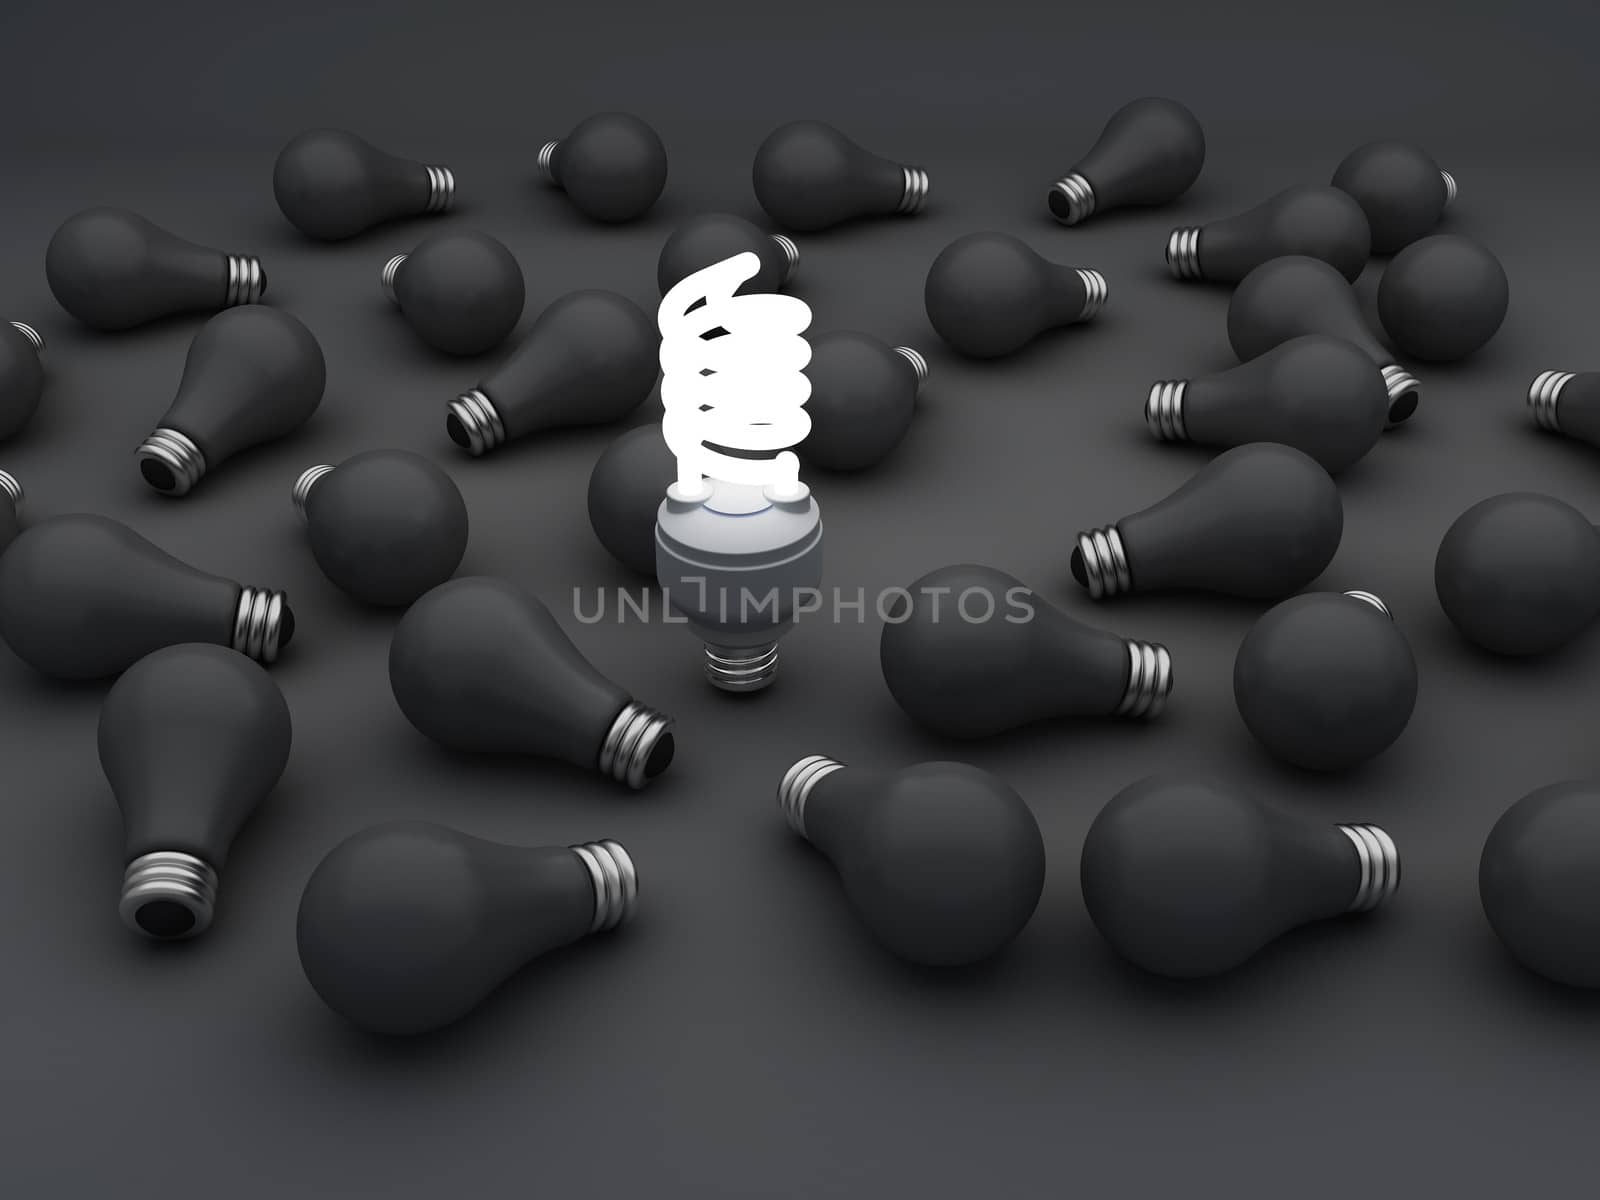 one glowing compact fluorescent light bulb standing out 
from the unlit incandescent light bulbs or Individuality concept